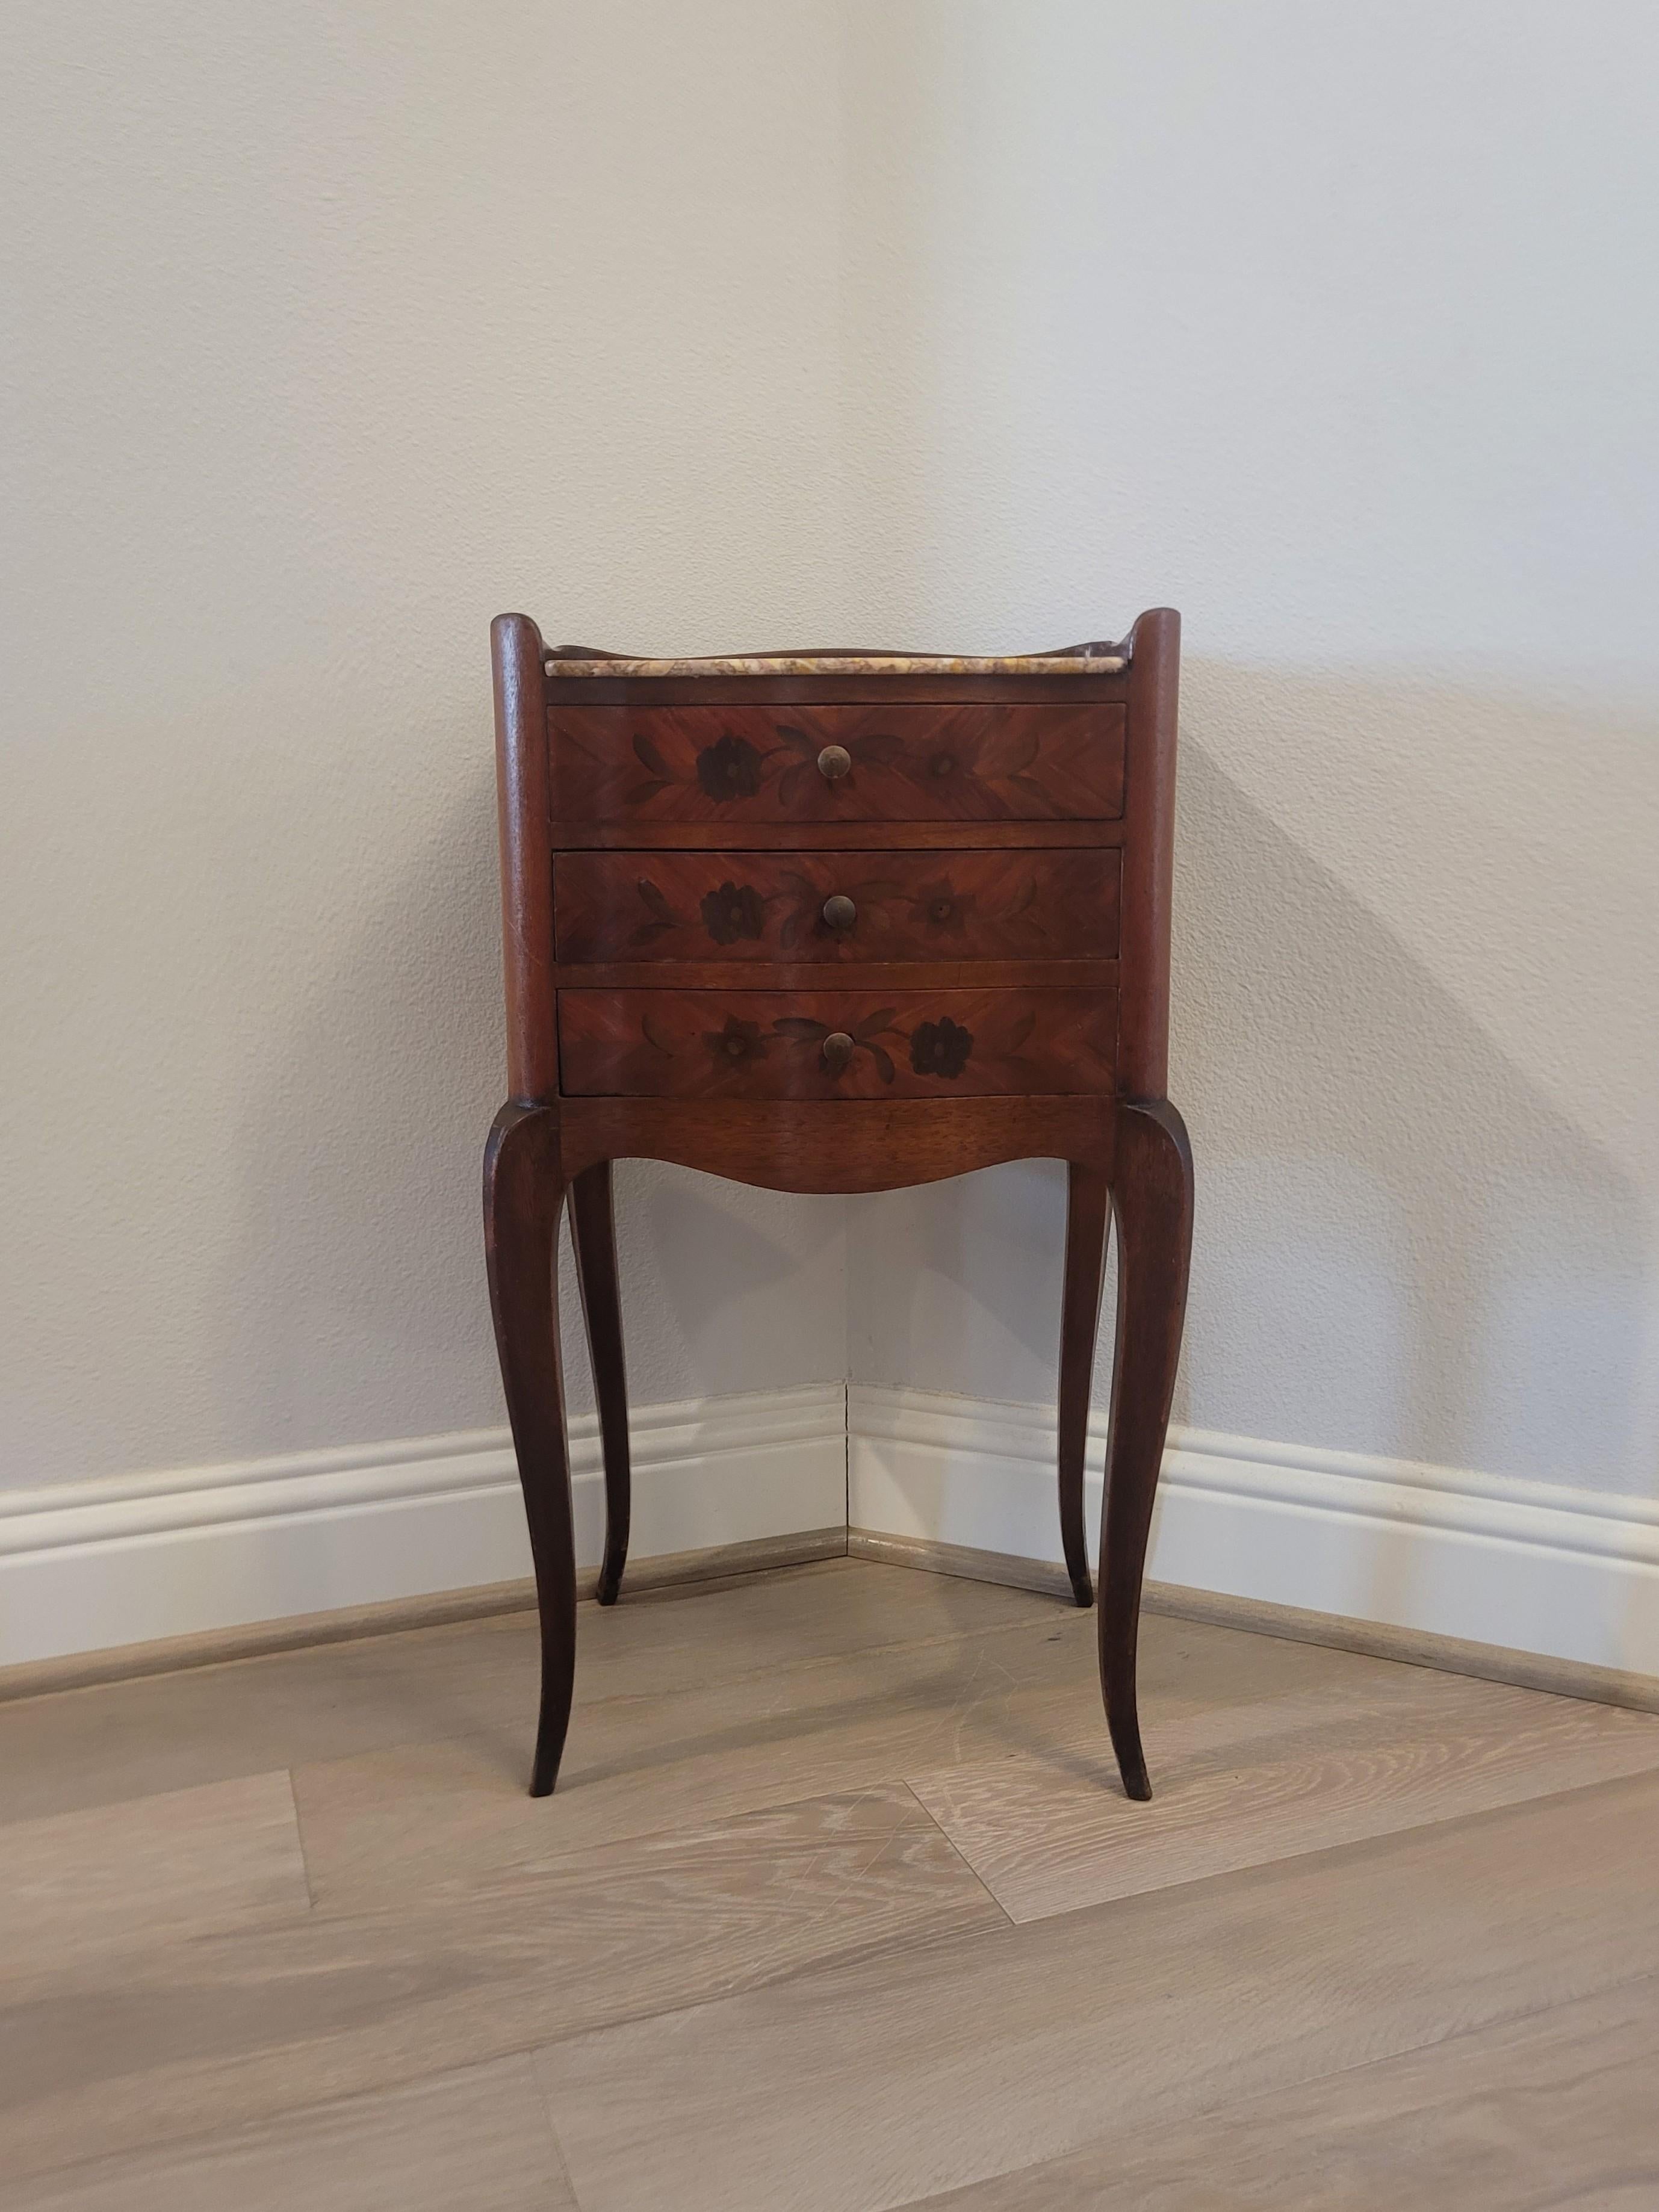 19th Century French Louis XV Style Marquetry Inlaid Nightstand Table For Sale 2